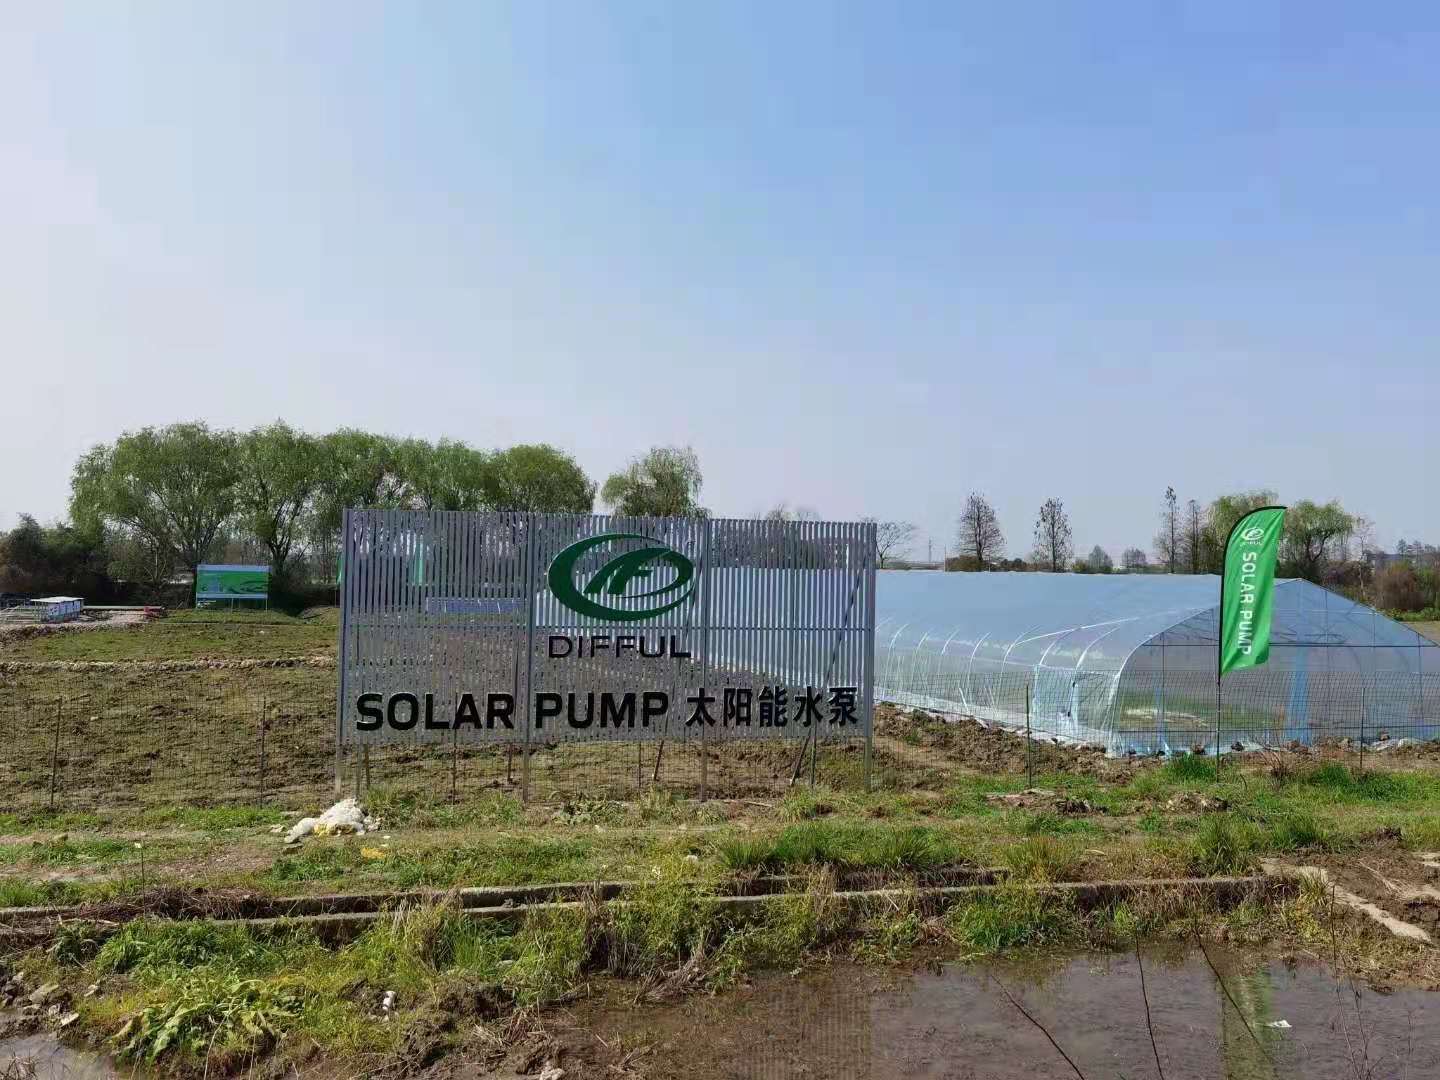 DIFFUL SOLAR PUMP - - Completion of the DIFFUL solar pump demonstration base